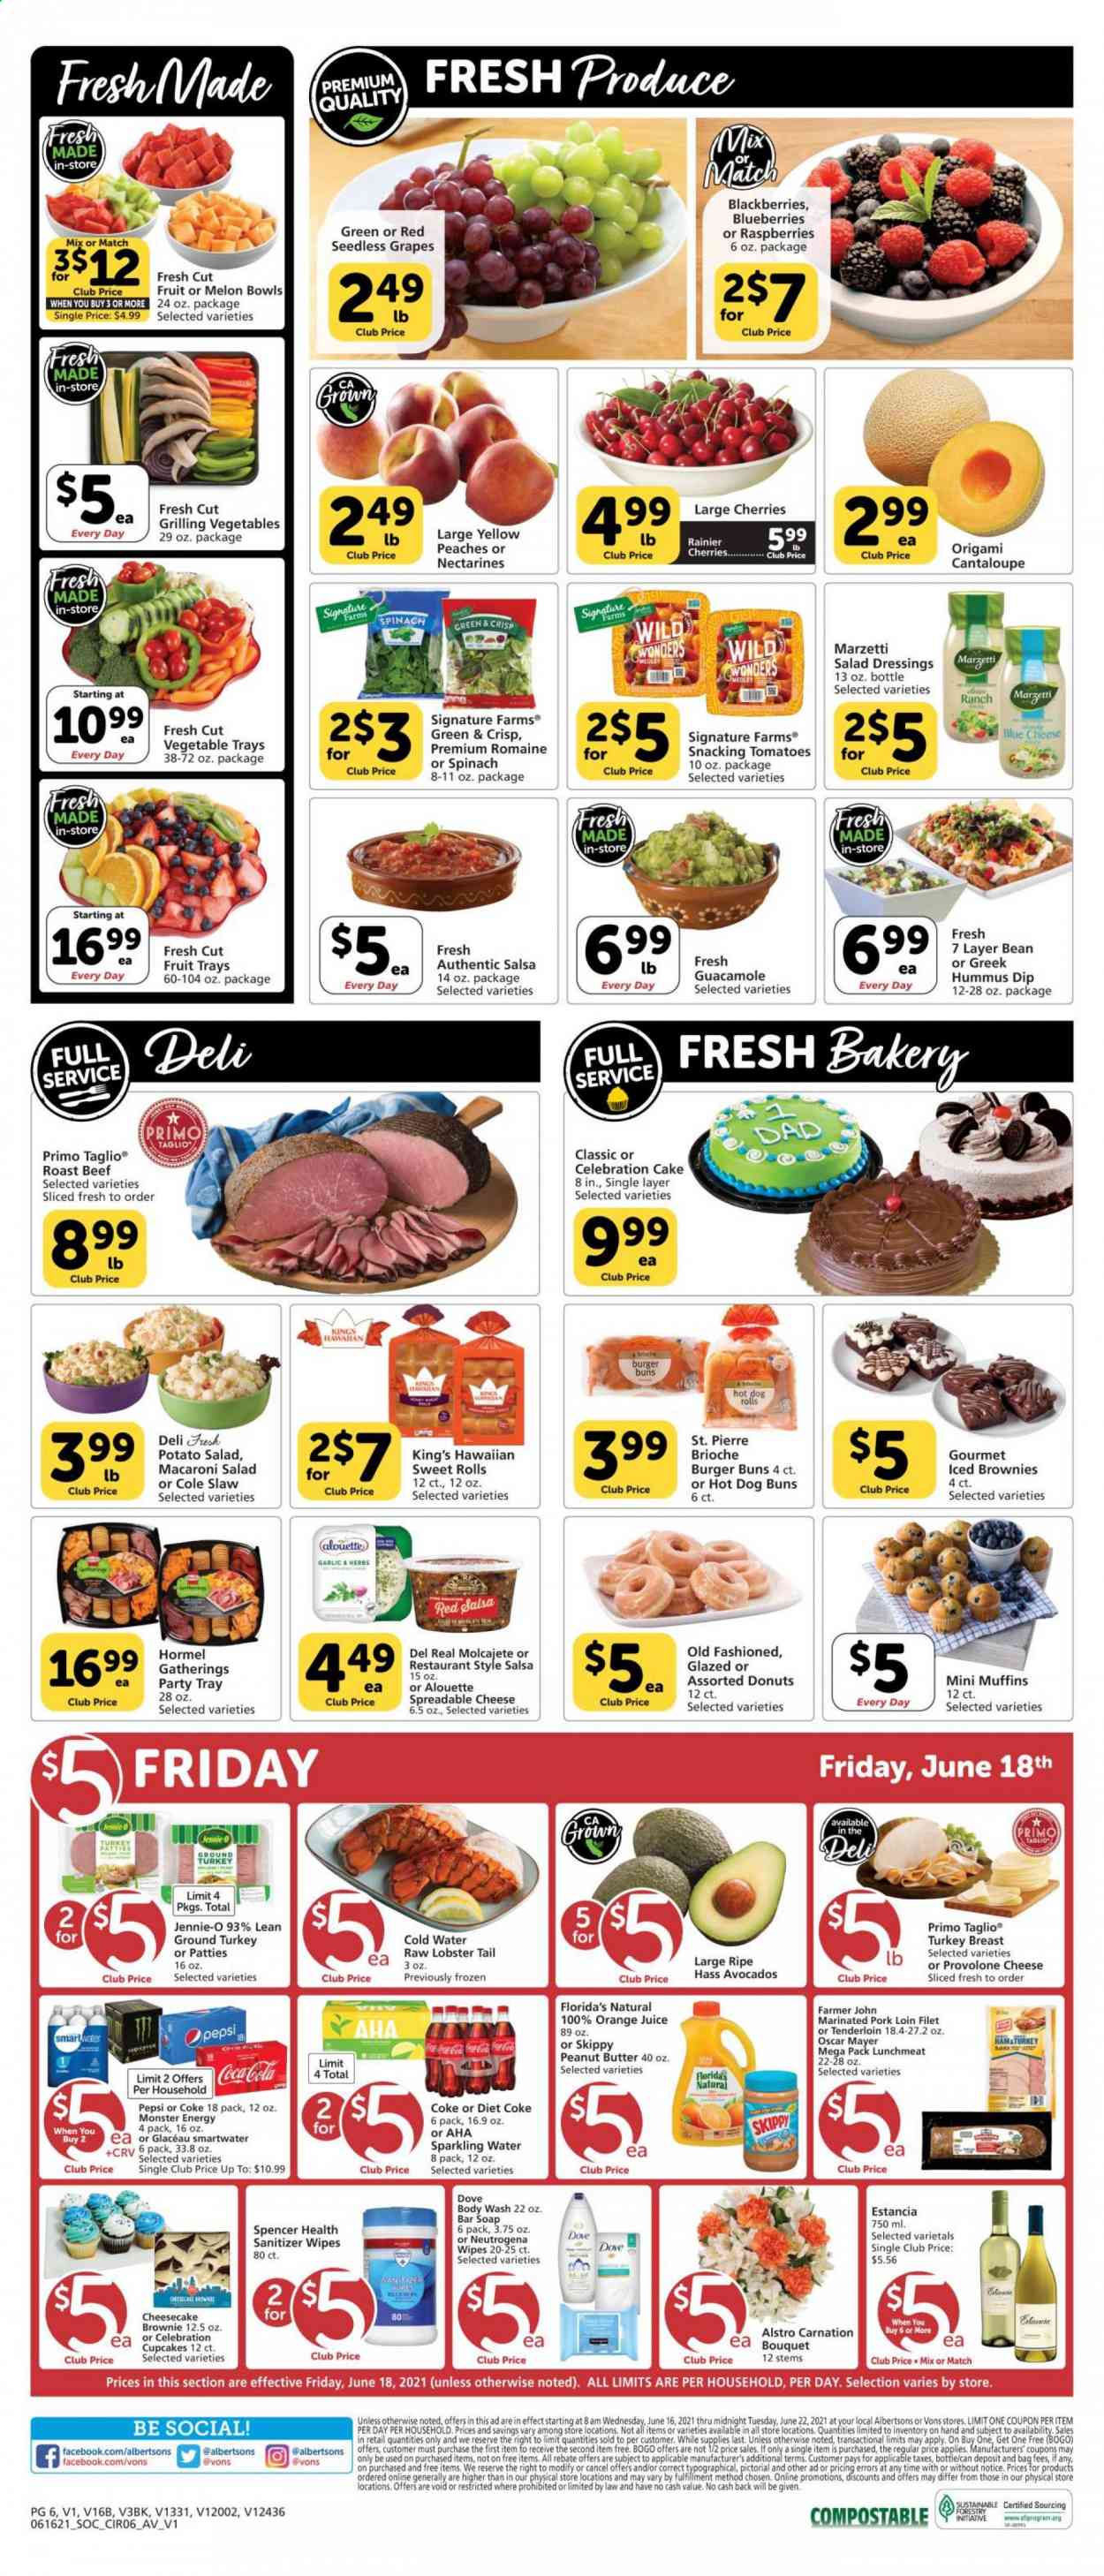 thumbnail - Vons Flyer - 06/16/2021 - 06/22/2021 - Sales products - seedless grapes, hot dog rolls, cake, buns, burger buns, brioche, cupcake, cheesecake, brownies, donut, muffin, sweet rolls, cantaloupe, garlic, tomatoes, blackberries, blueberries, grapes, raspberries, cherries, ground turkey, turkey breast, beef meat, roast beef, pork loin, pork meat, marinated pork, lobster, lobster tail, Hormel, Oscar Mayer, hummus, guacamole, potato salad, macaroni salad, lunch meat, cheese, Provolone, dip, Celebration, Florida's Natural, herbs, salad dressing, salsa, peanut butter, Coca-Cola, Pepsi, orange juice, juice, Monster, Diet Coke, Monster Energy, sparkling water, Smartwater, Estancia, wipes, body wash, Dove, soap bar, soap, Neutrogena, tray, bouquet, nectarines, melons, peaches. Page 6.